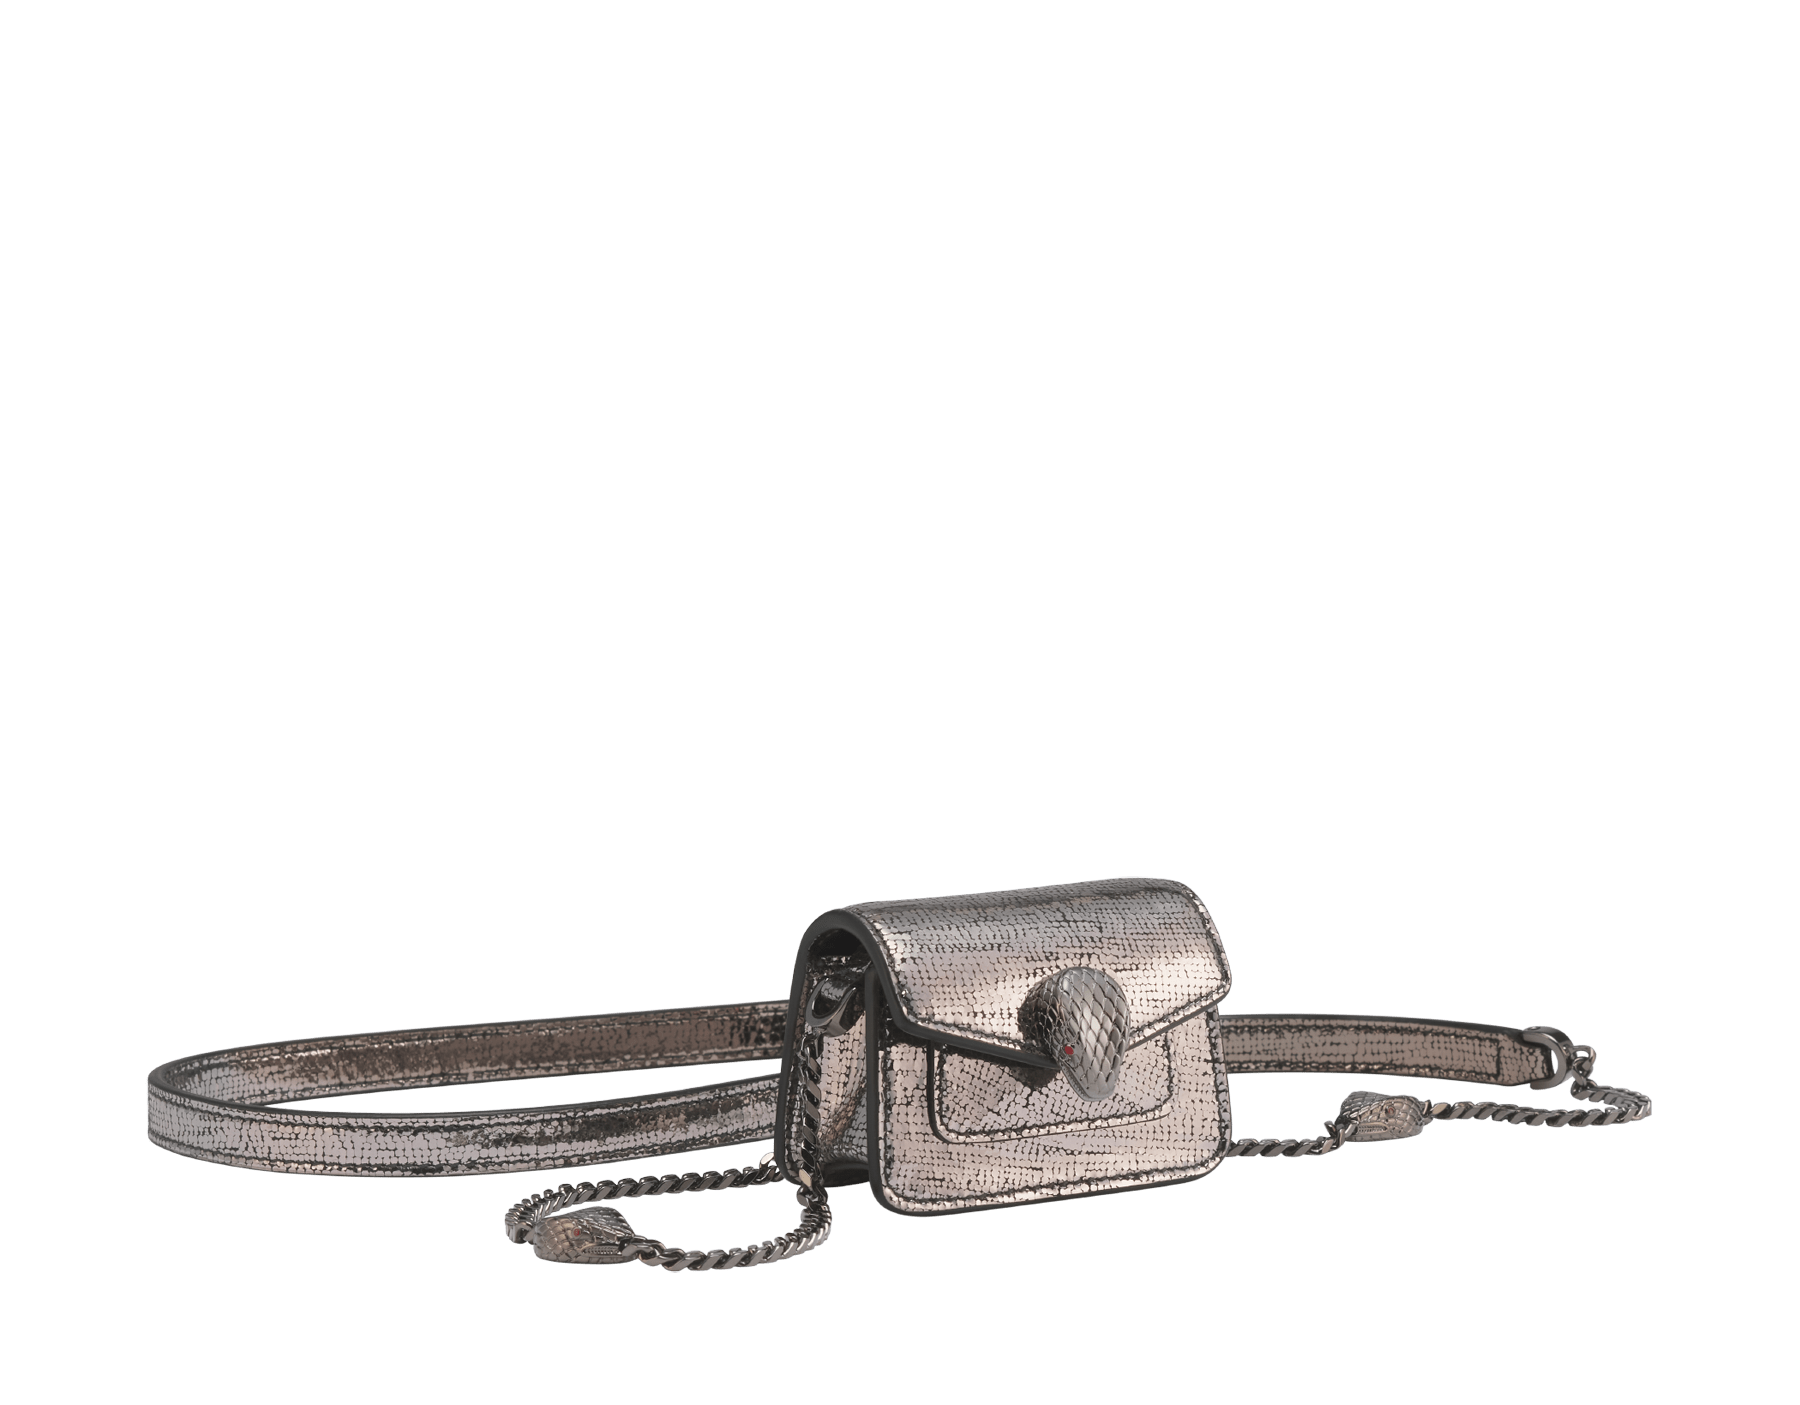 Serpenti Forever micro bag in gold calf leather. Captivating snakehead closure in light gold-plated brass embellished with red enamel eyes. SEA-NANOCROSSBODY image 1